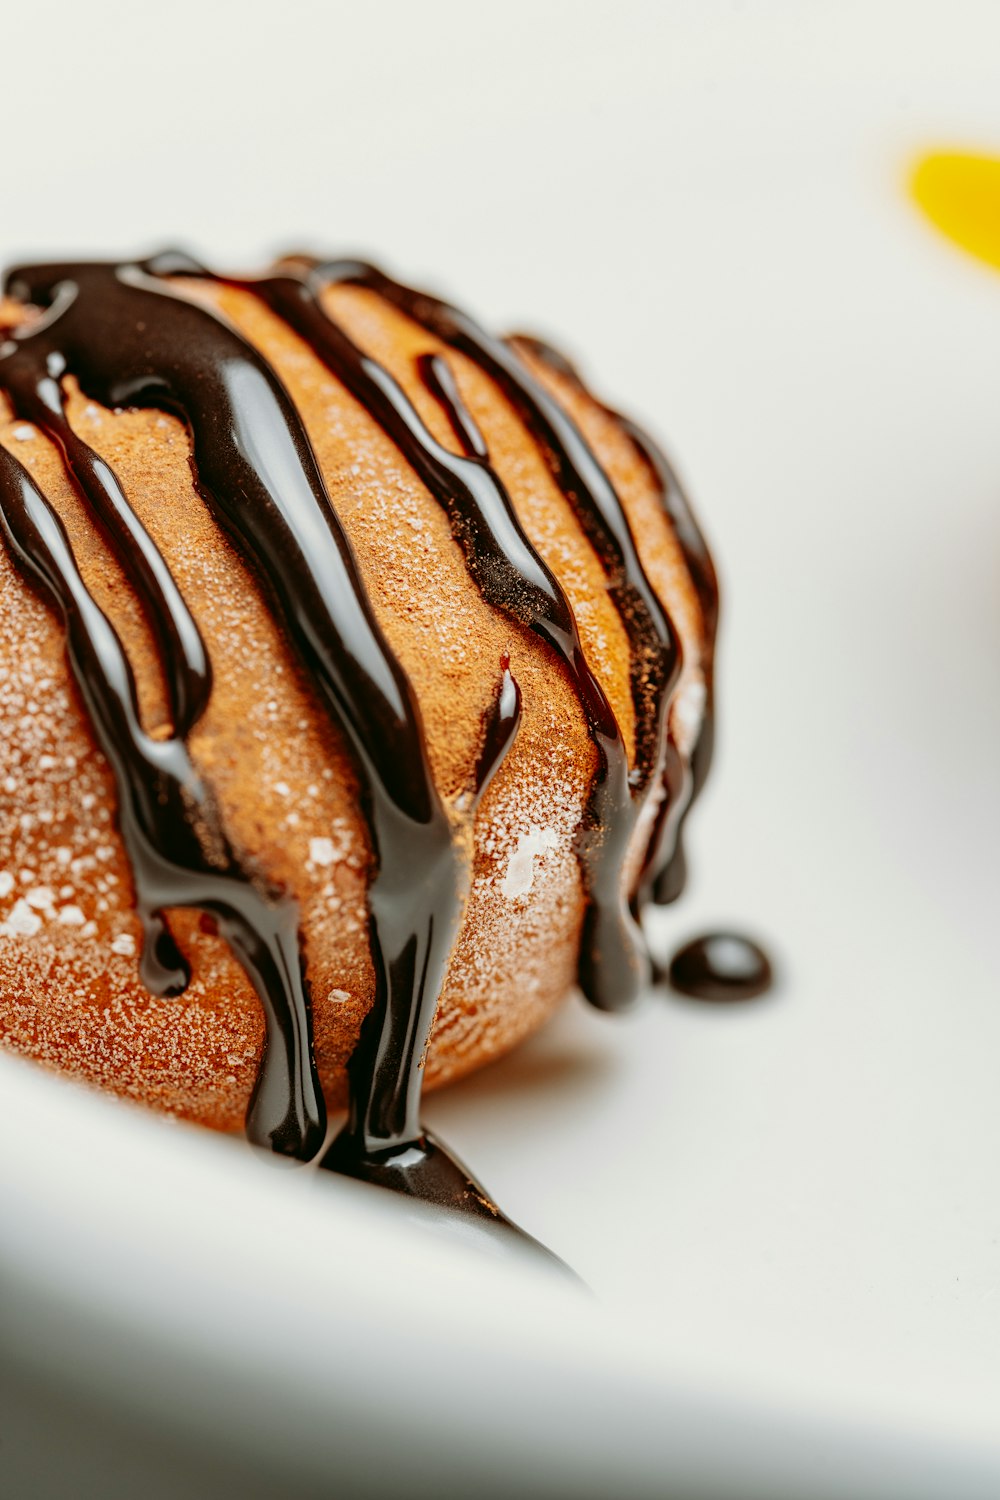 a pastry with chocolate drizzled on top of it